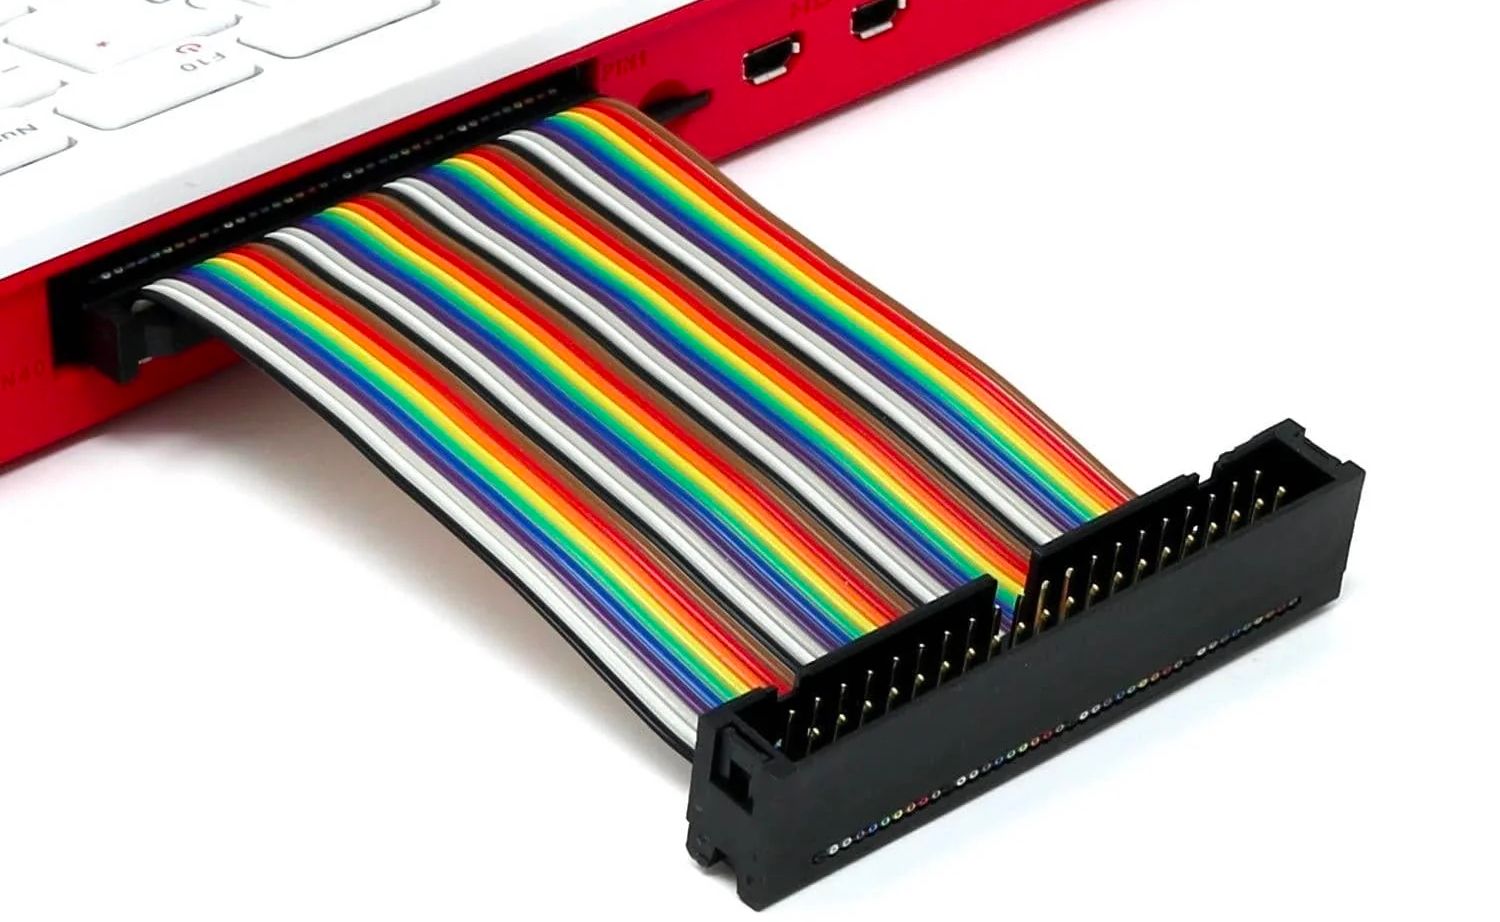 Ribbon cable adapter attached to Pi 400 GPIO header